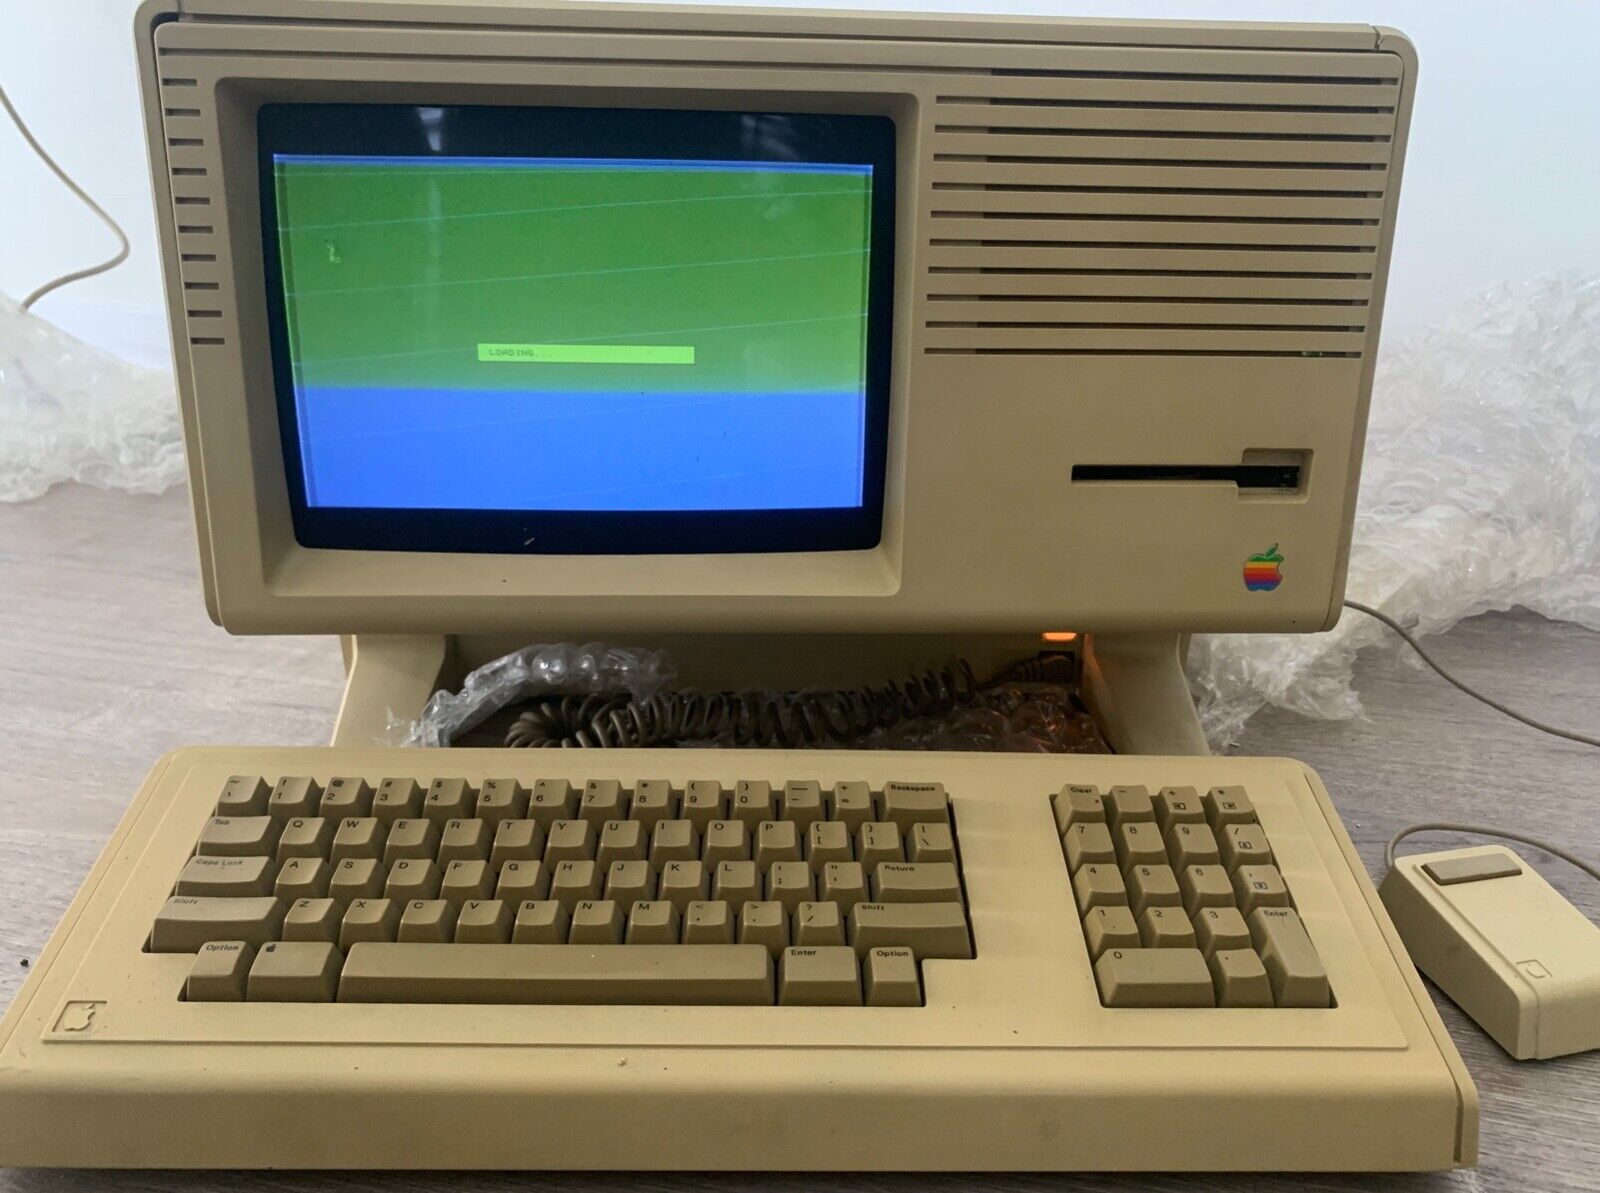 Apple Lisa 2 Model A6S0200 BOOTS, w/Keyboard, Mouse RARE NM Vintage Macintosh